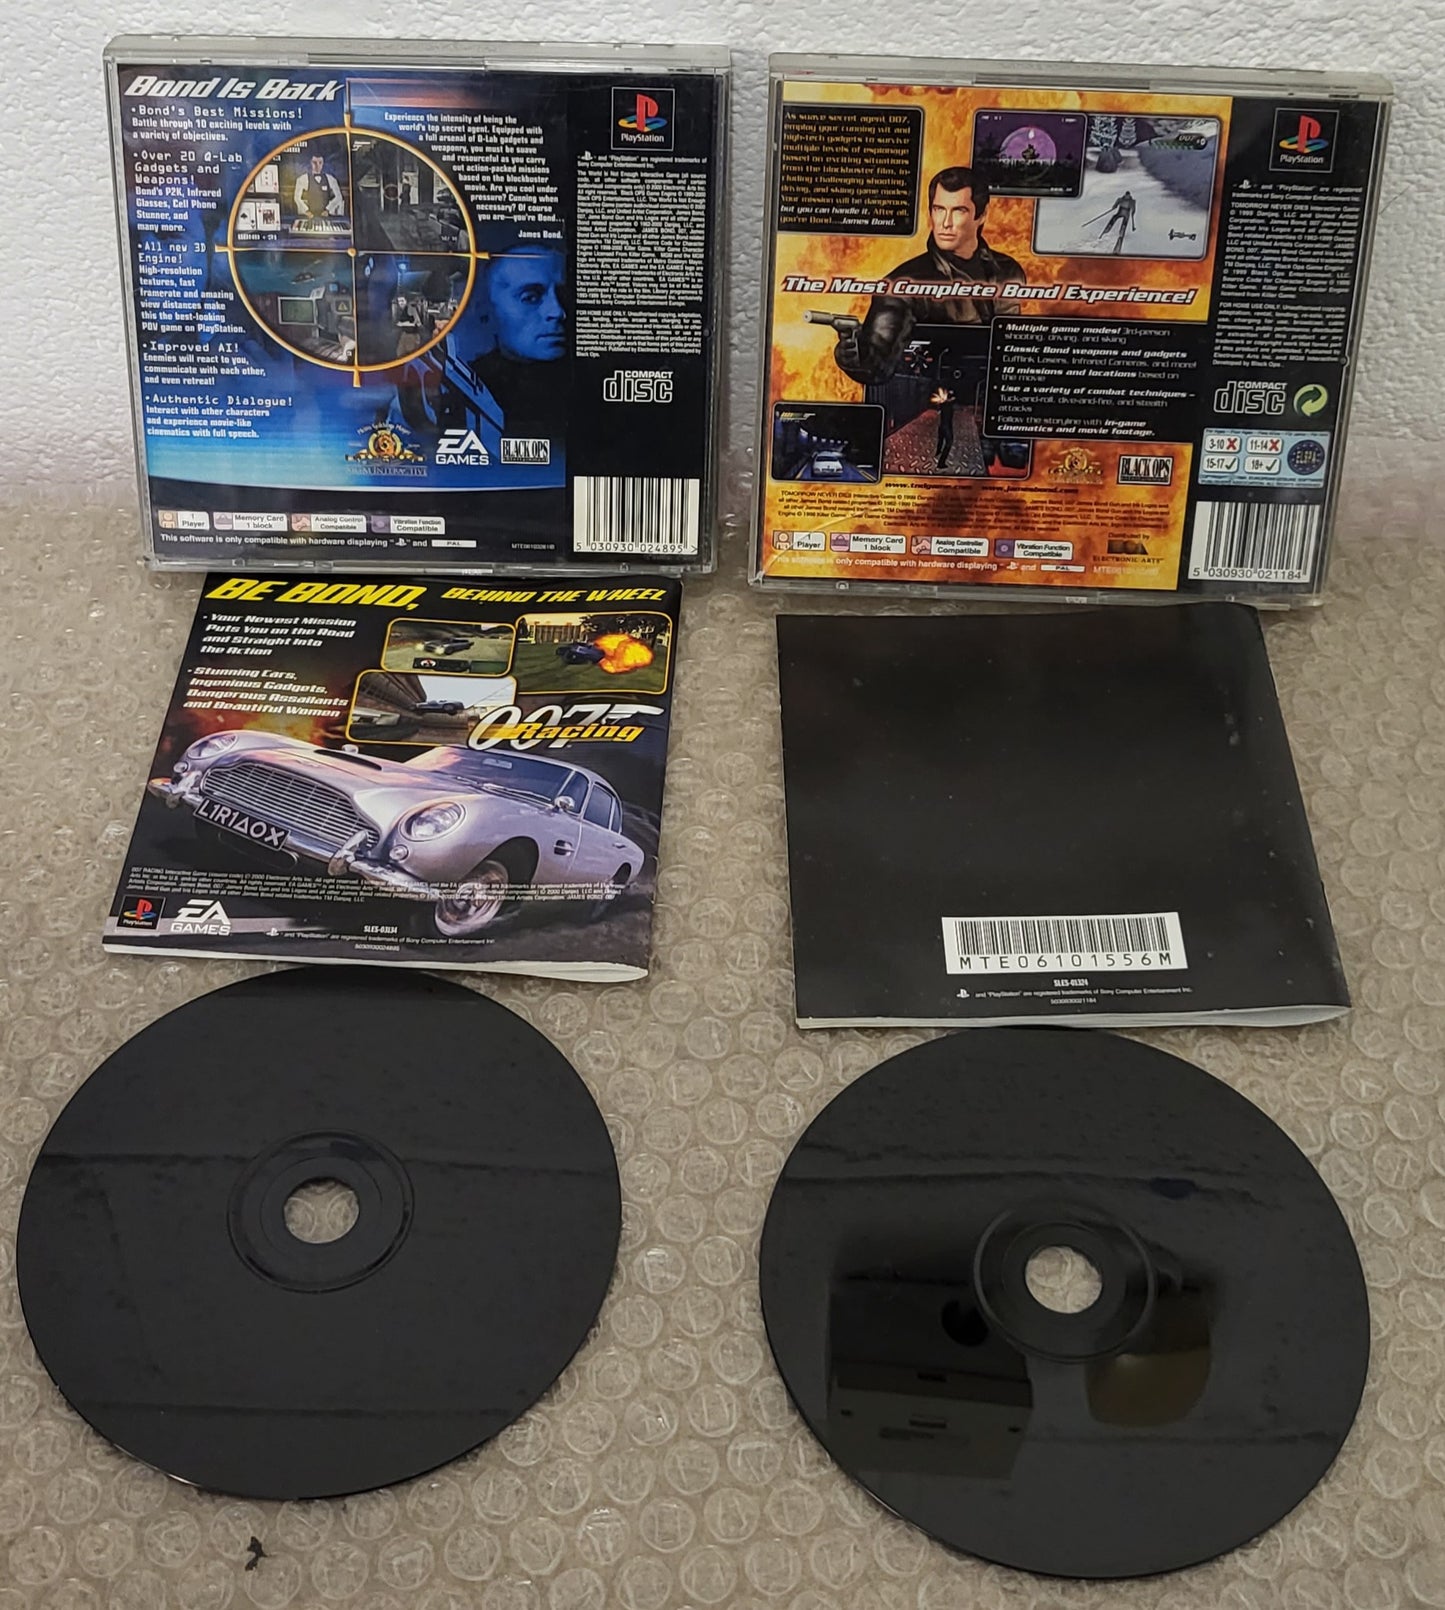 007 The World is not Enough & Tomorrow Never Dies Sony Playstation 1 (PS1) Game Bundle